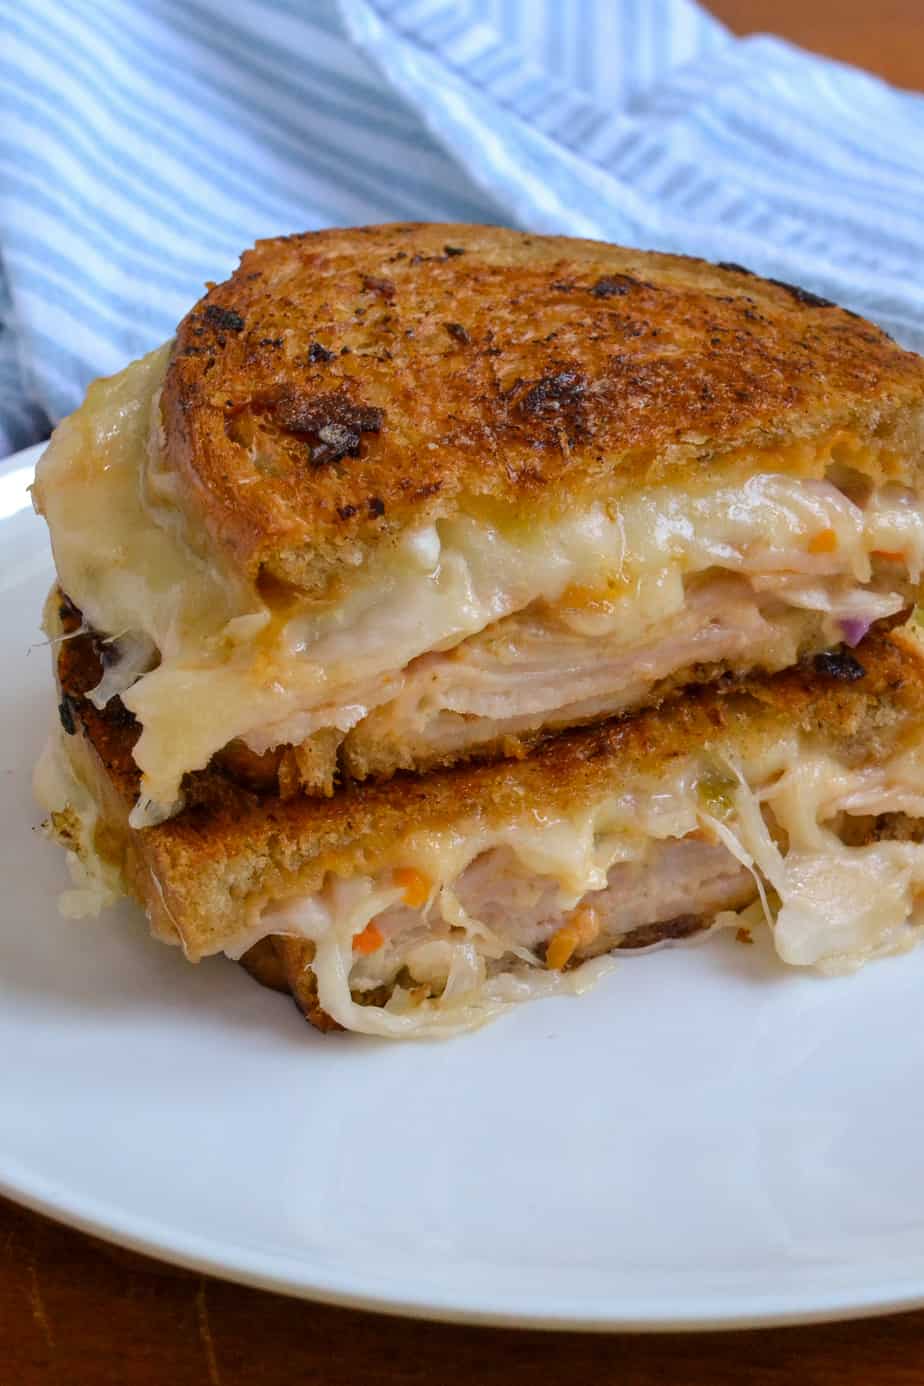 A double stacked Rachel Sandwich with turkey, Swiss and coleslaw